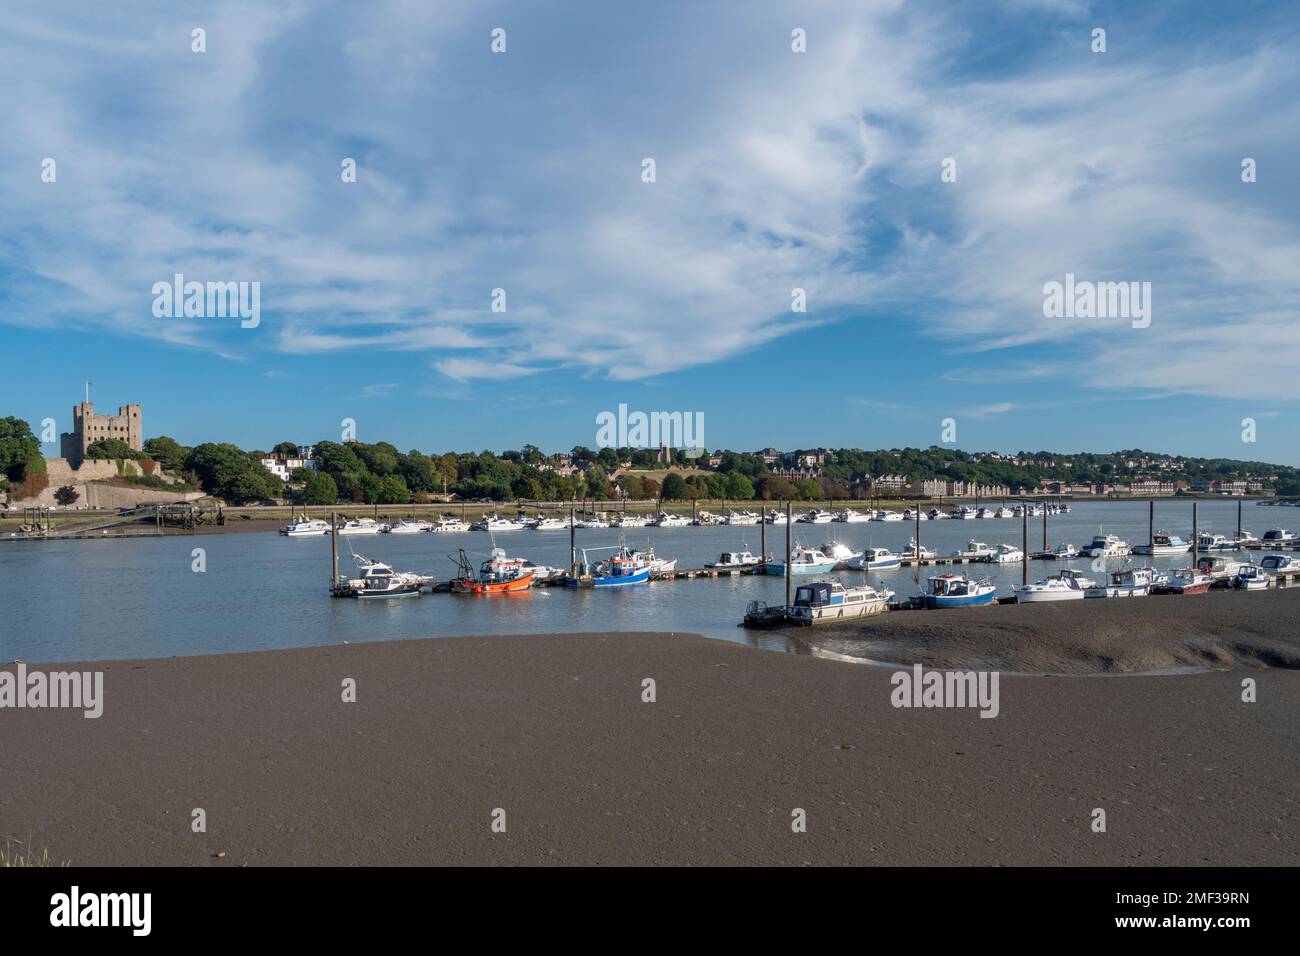 View over boats of Strood Yacht Club on the River Medway, Rochester, Kent, UK. Stock Photo